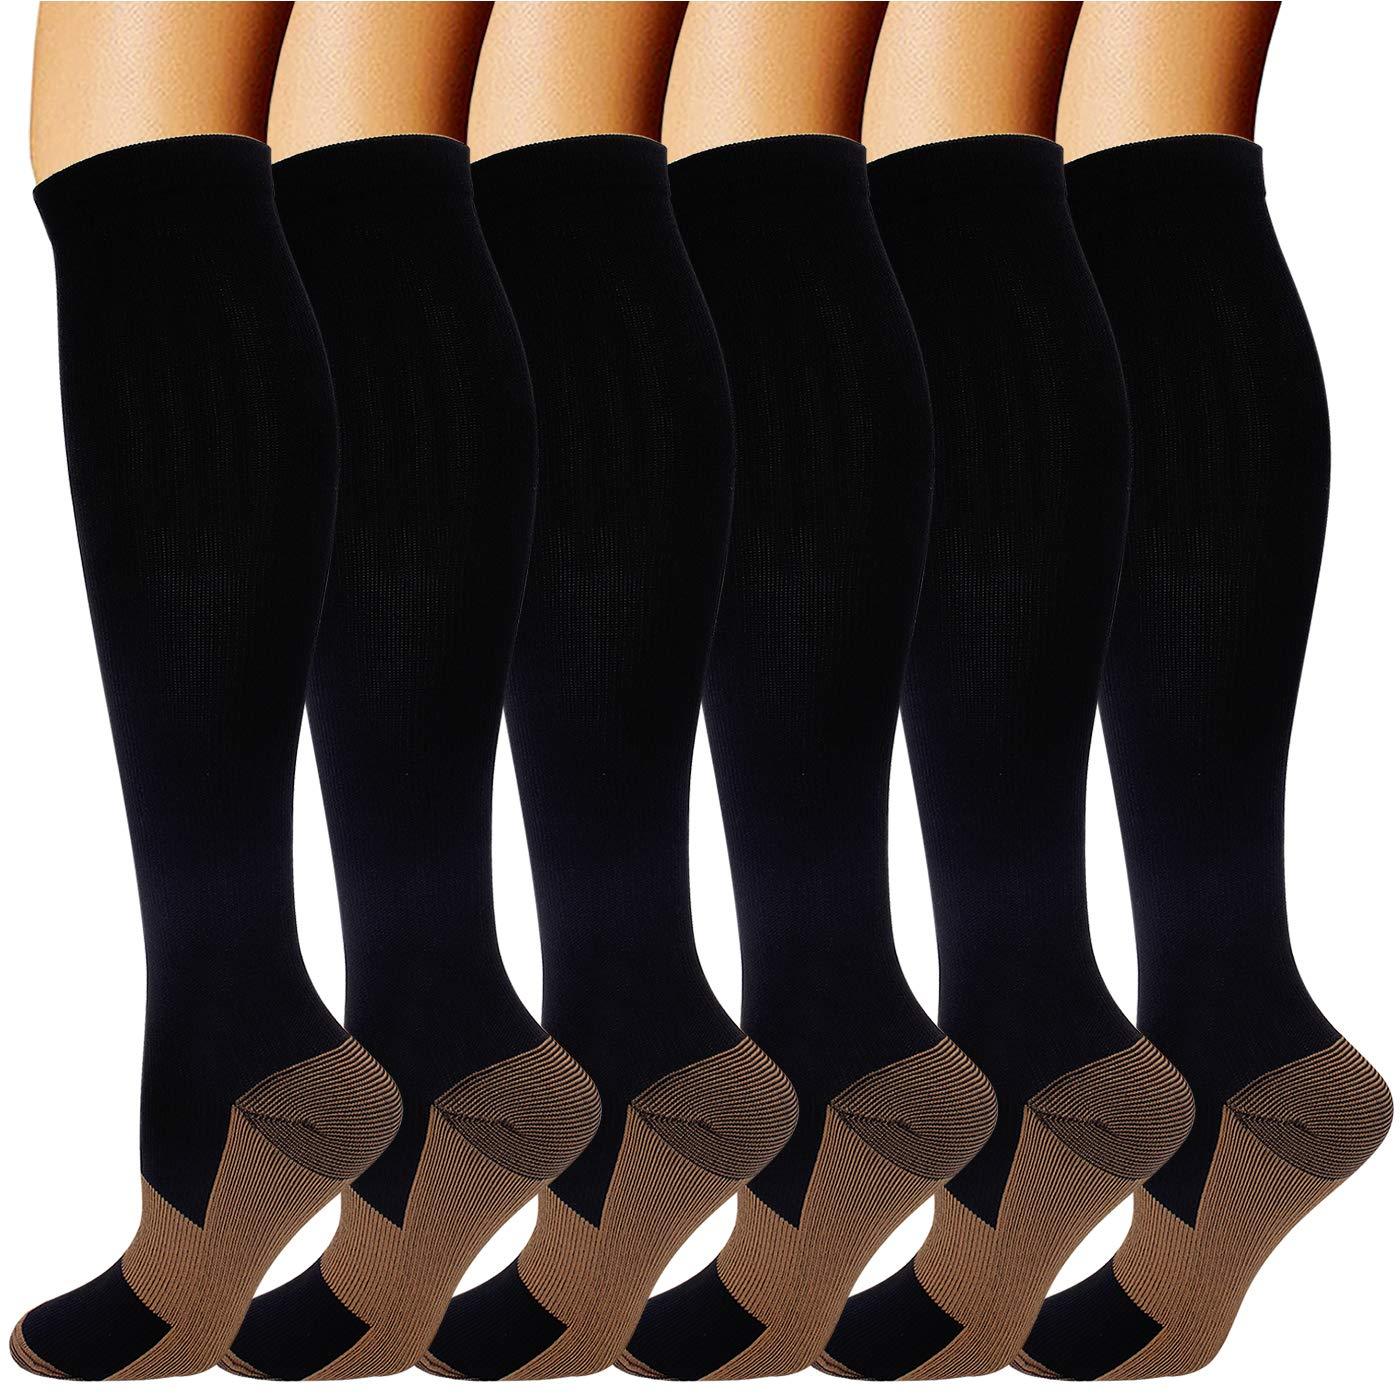 CopperMed Compression Socks - Support Stockings ~ Reduce Swelling!